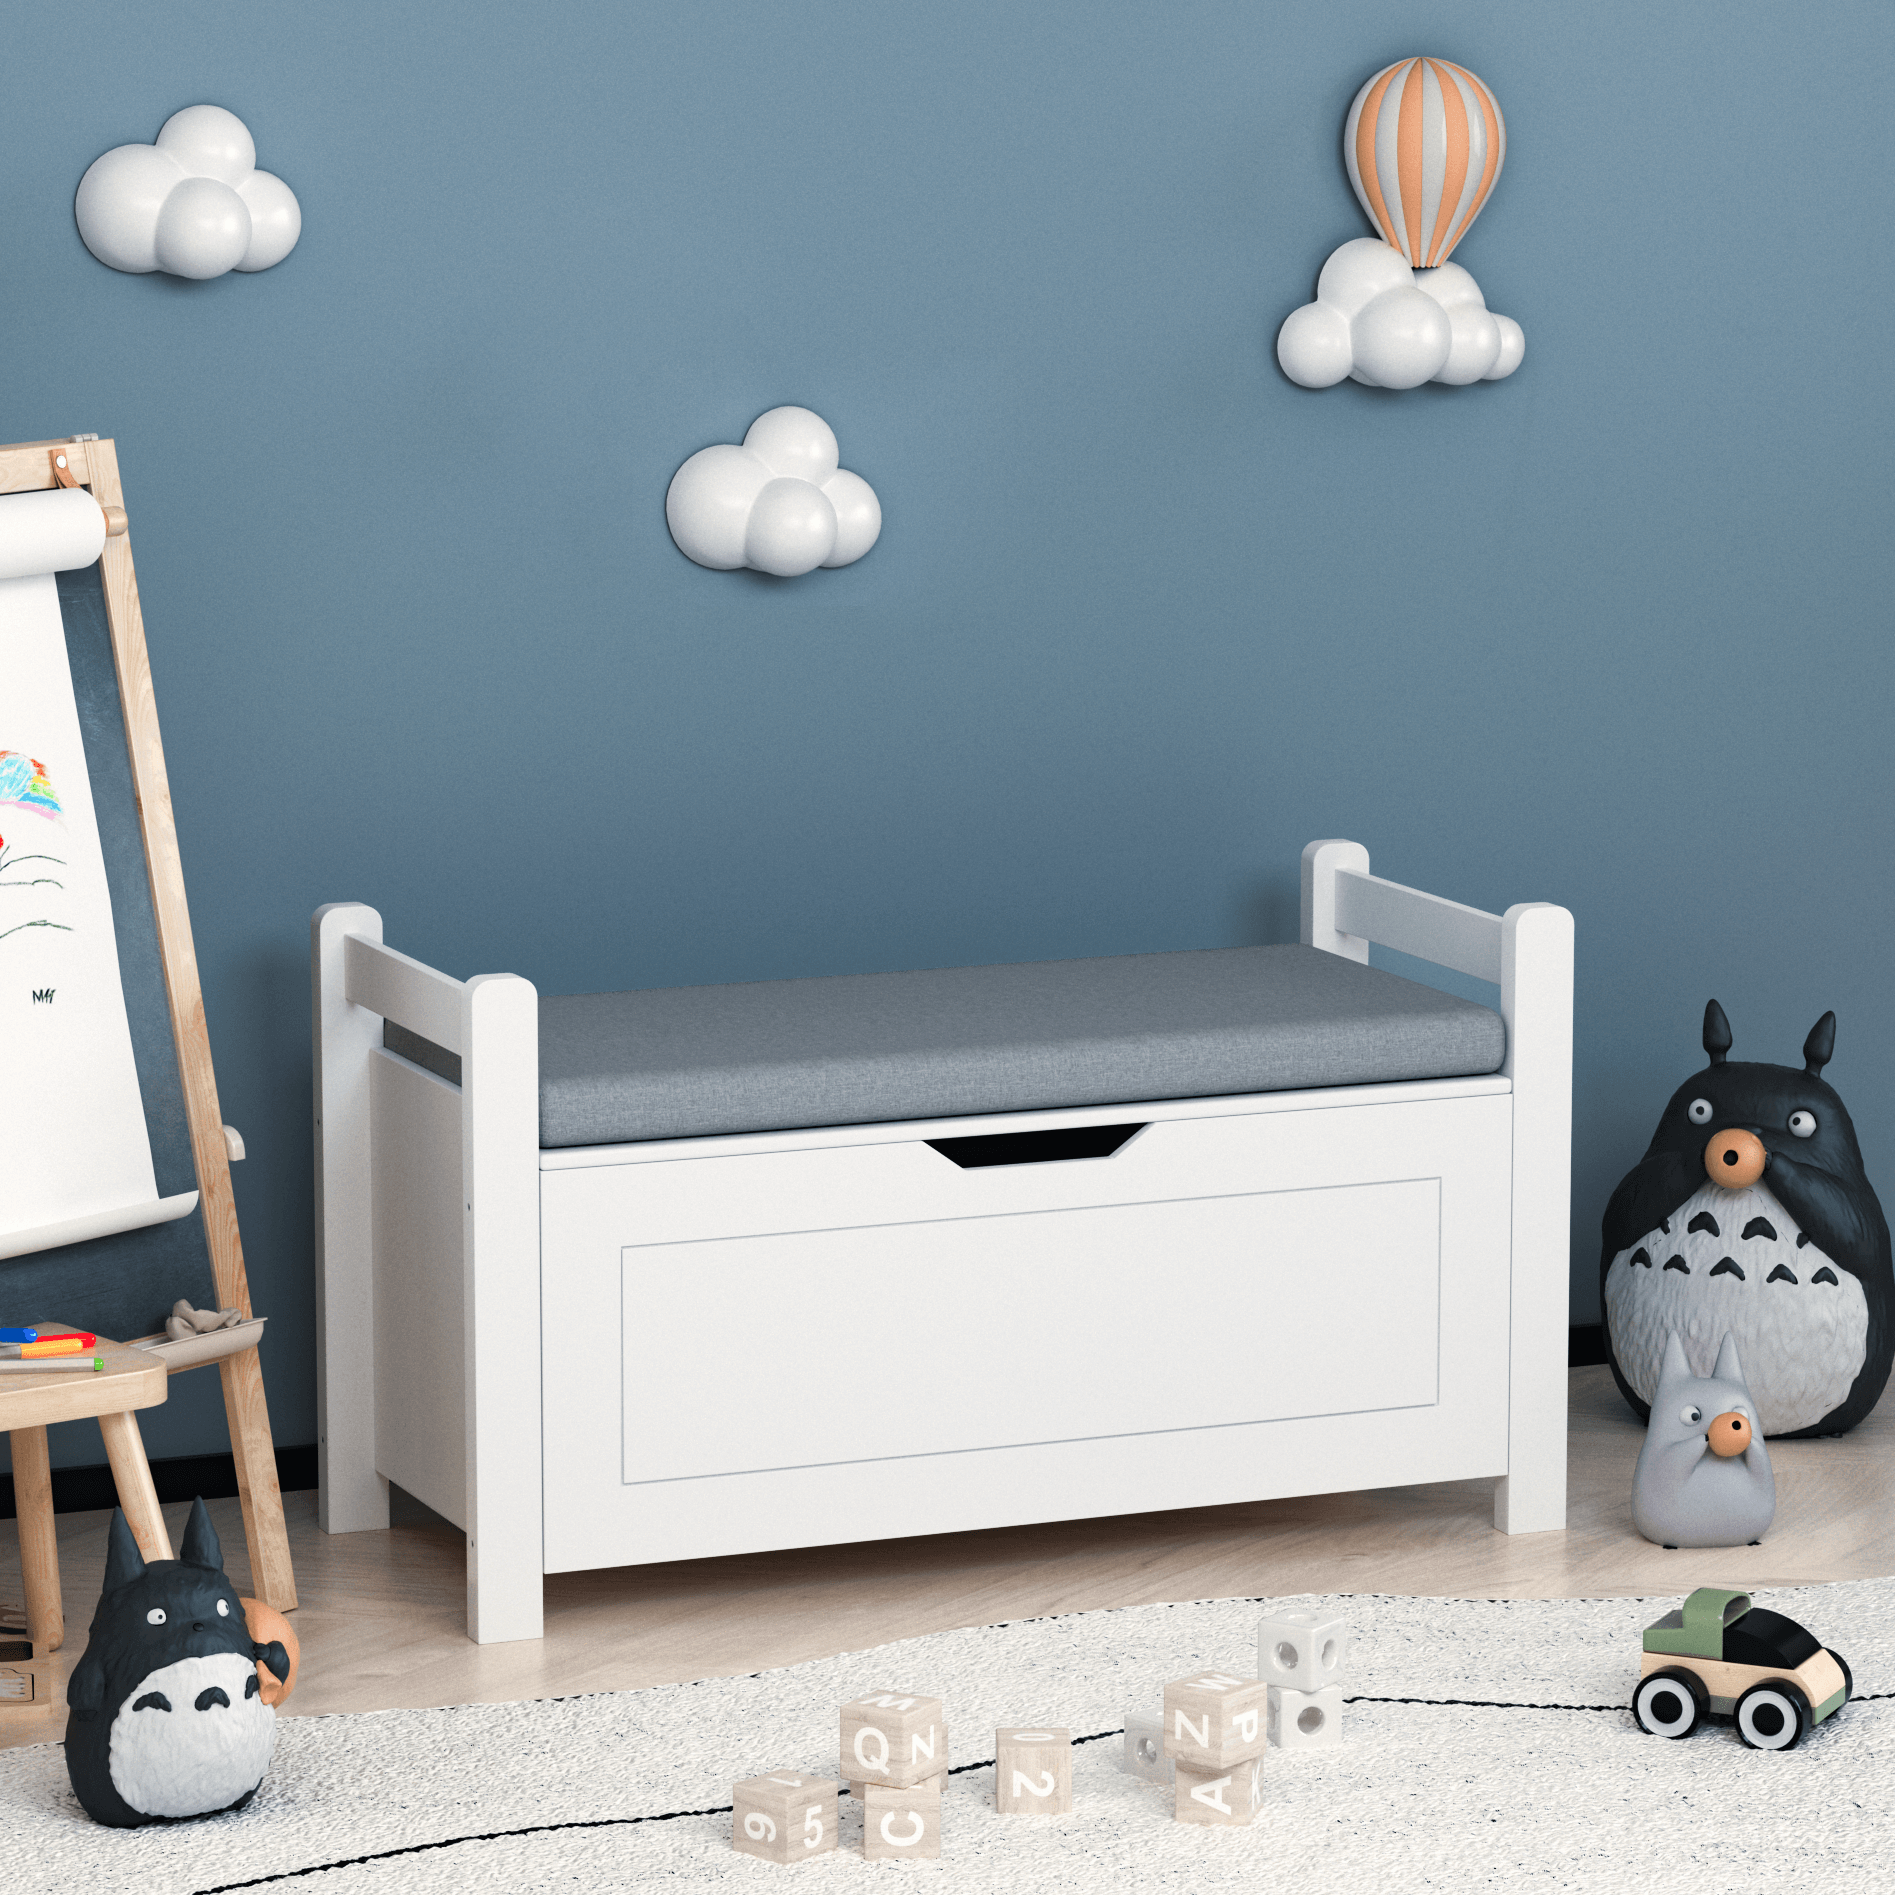 🆓🚛 Kids Toy Box Chest, White Rubber Wood Toy Box for Boys Girls, Large Storage Cabinet With Cushion Seat Bench/Flip-Top Lid/Safety Hinge, Toy Storage Organizer Trunk for Nursery, Playroom